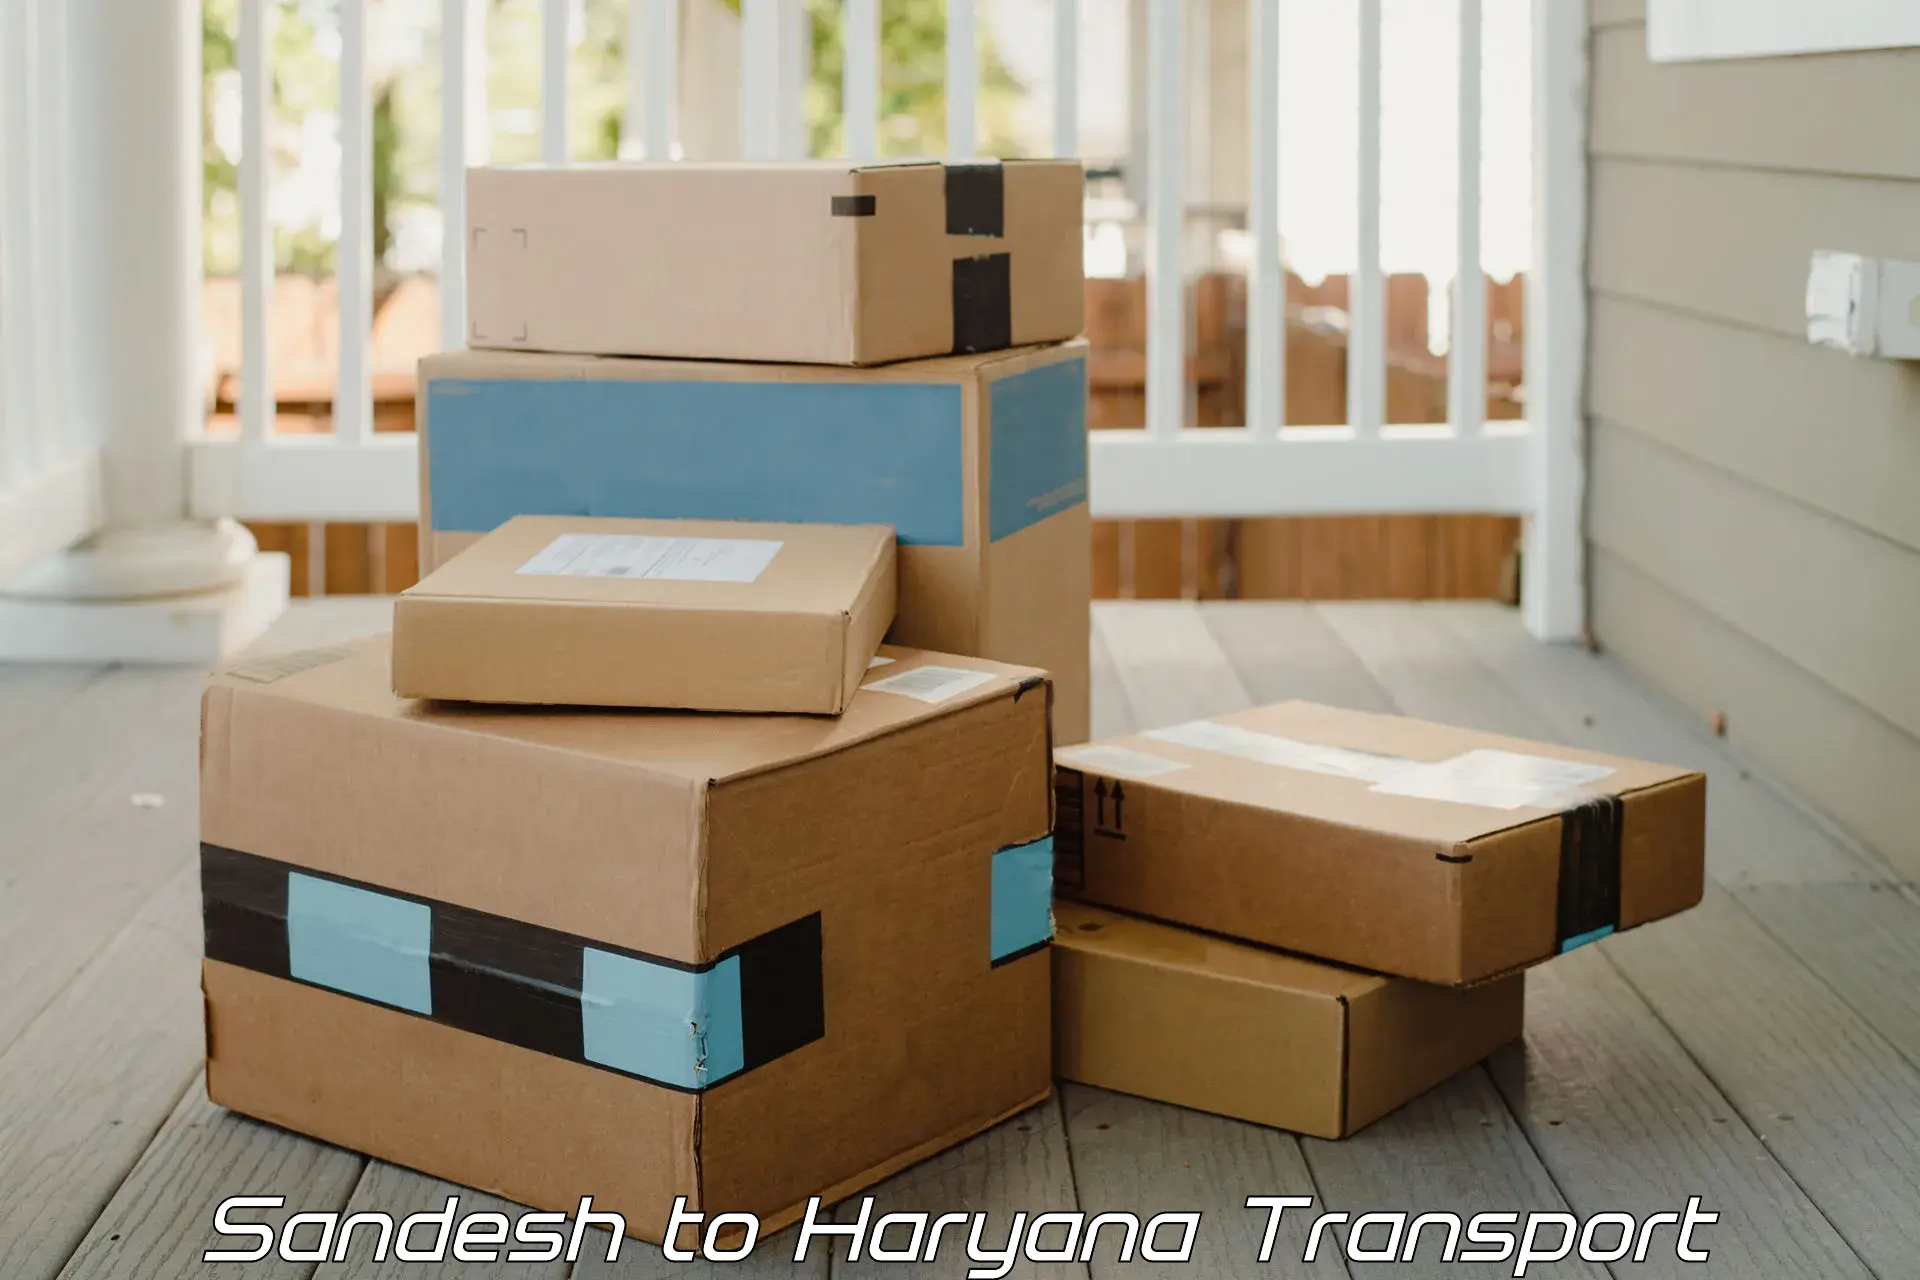 Shipping partner in Sandesh to Pinjore